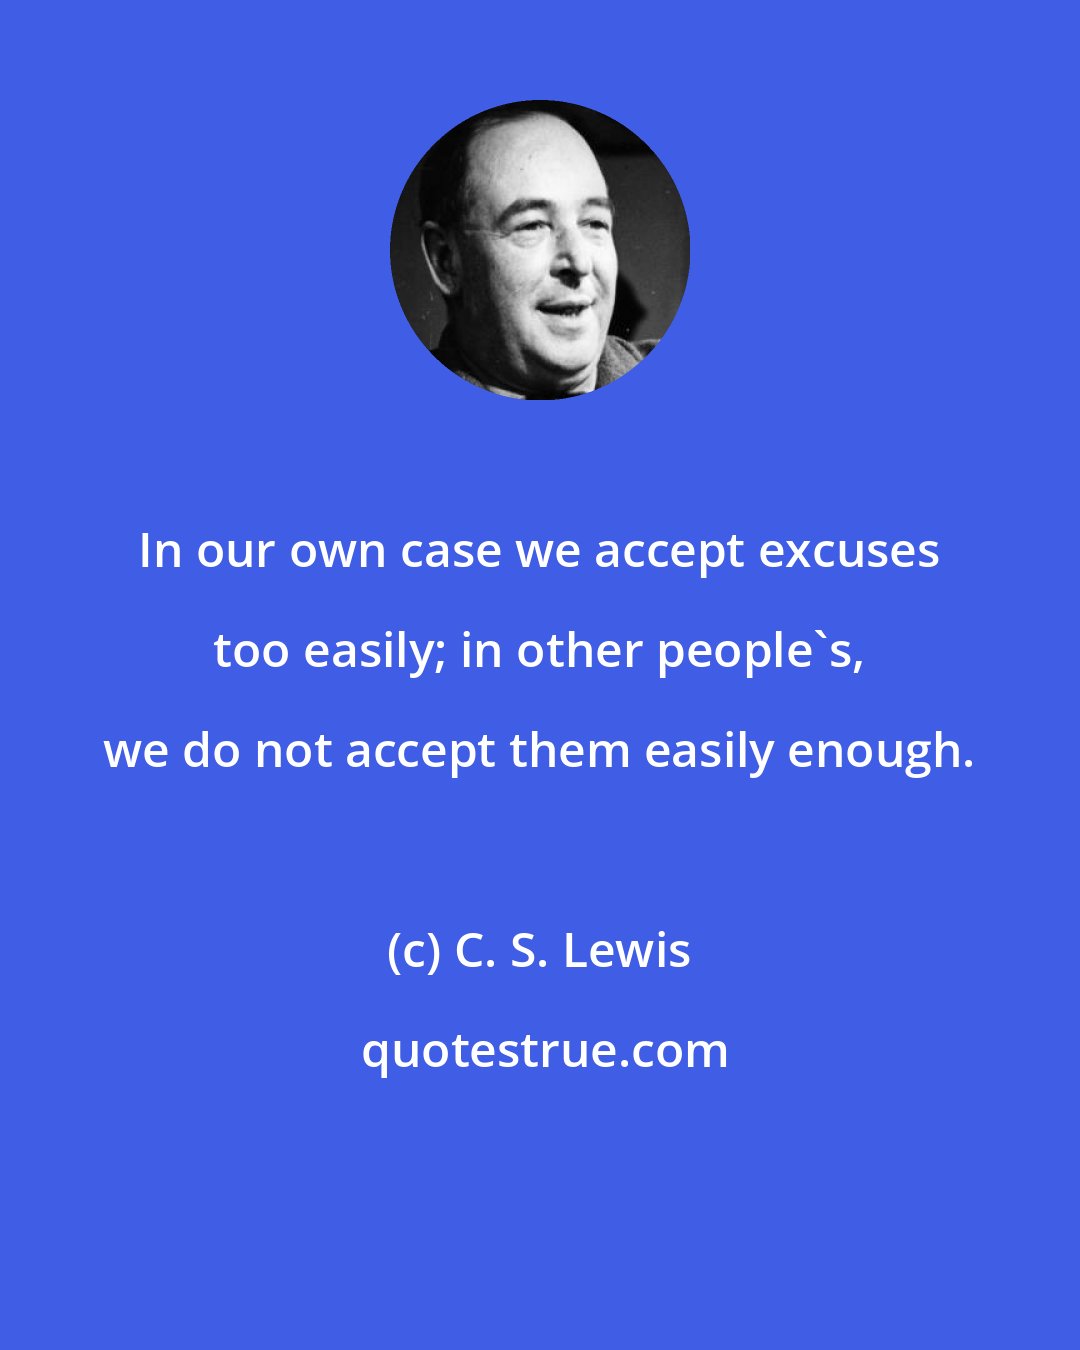 C. S. Lewis: In our own case we accept excuses too easily; in other people's, we do not accept them easily enough.